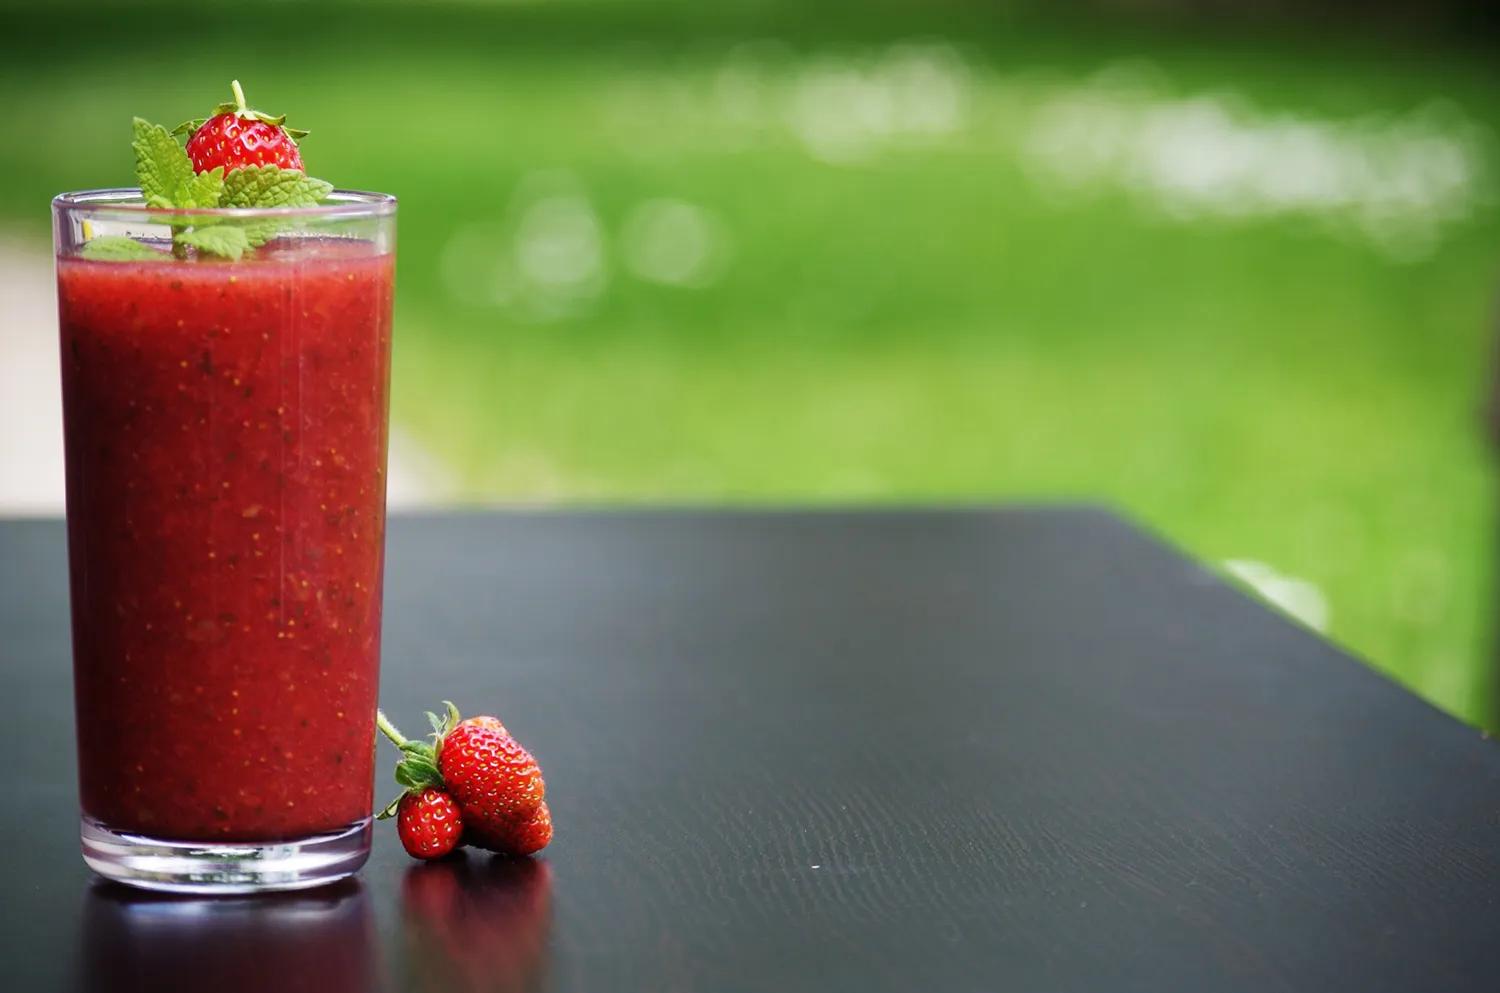 Strawberry Smoothie For Healthy Lifestyle